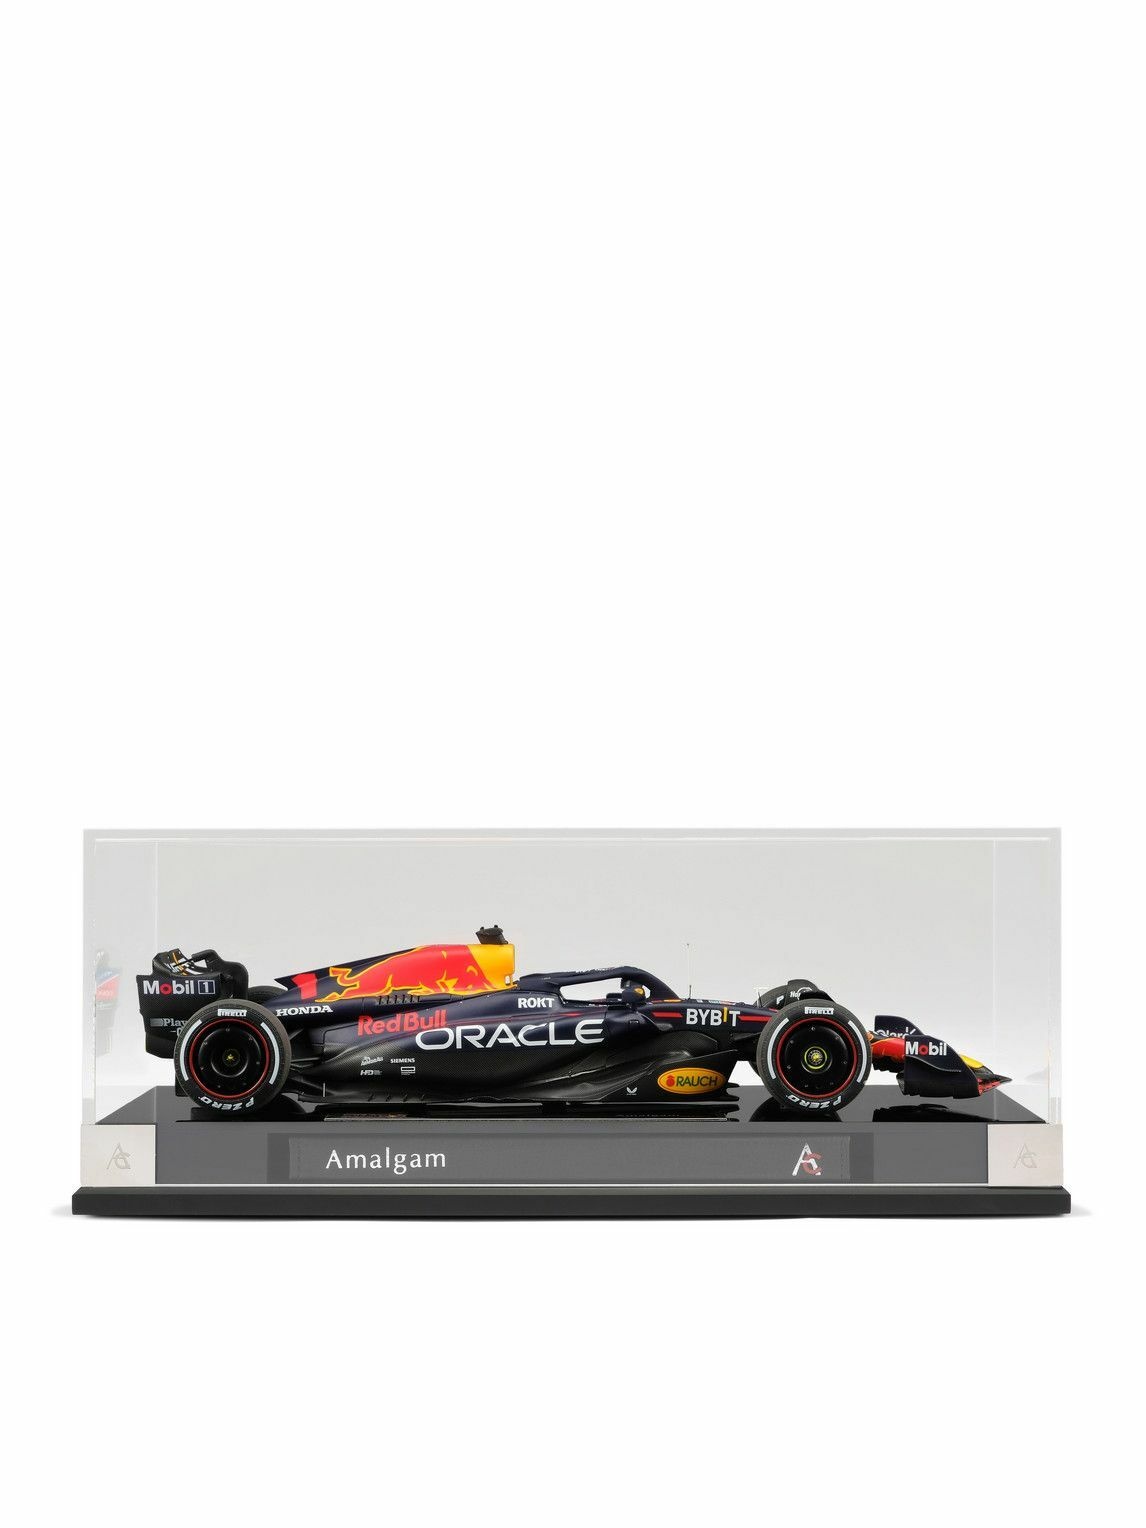 Photo: Amalgam Collection - Oracle Red Bull Racing RB19 Verstappen 1:18 Model Car